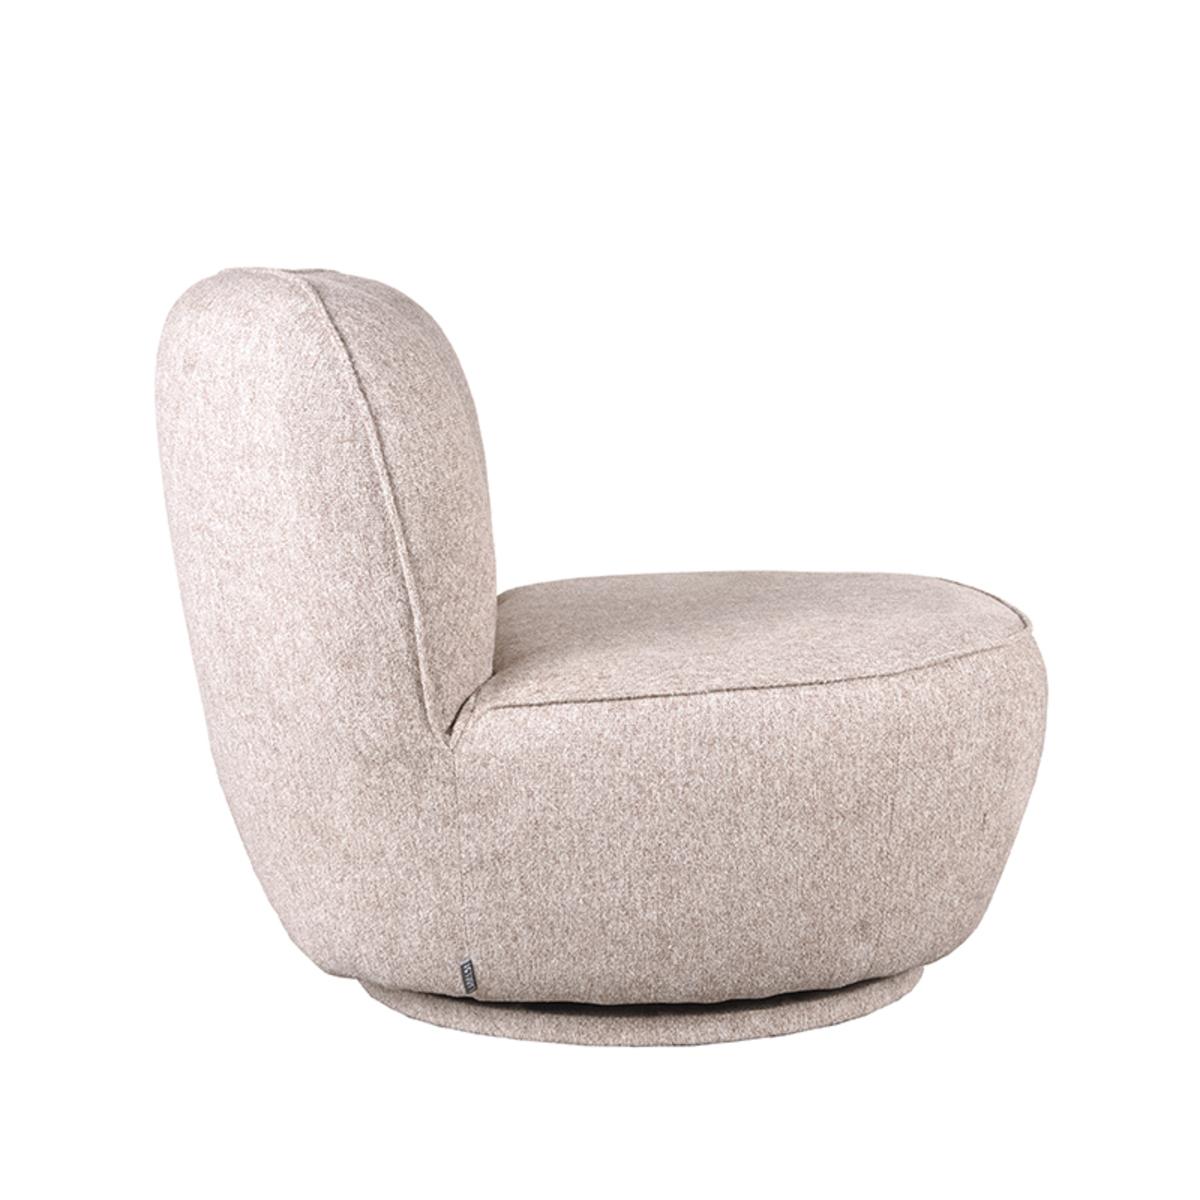  Fauteuil Bunny - Taupe - Amazy afbeelding 3